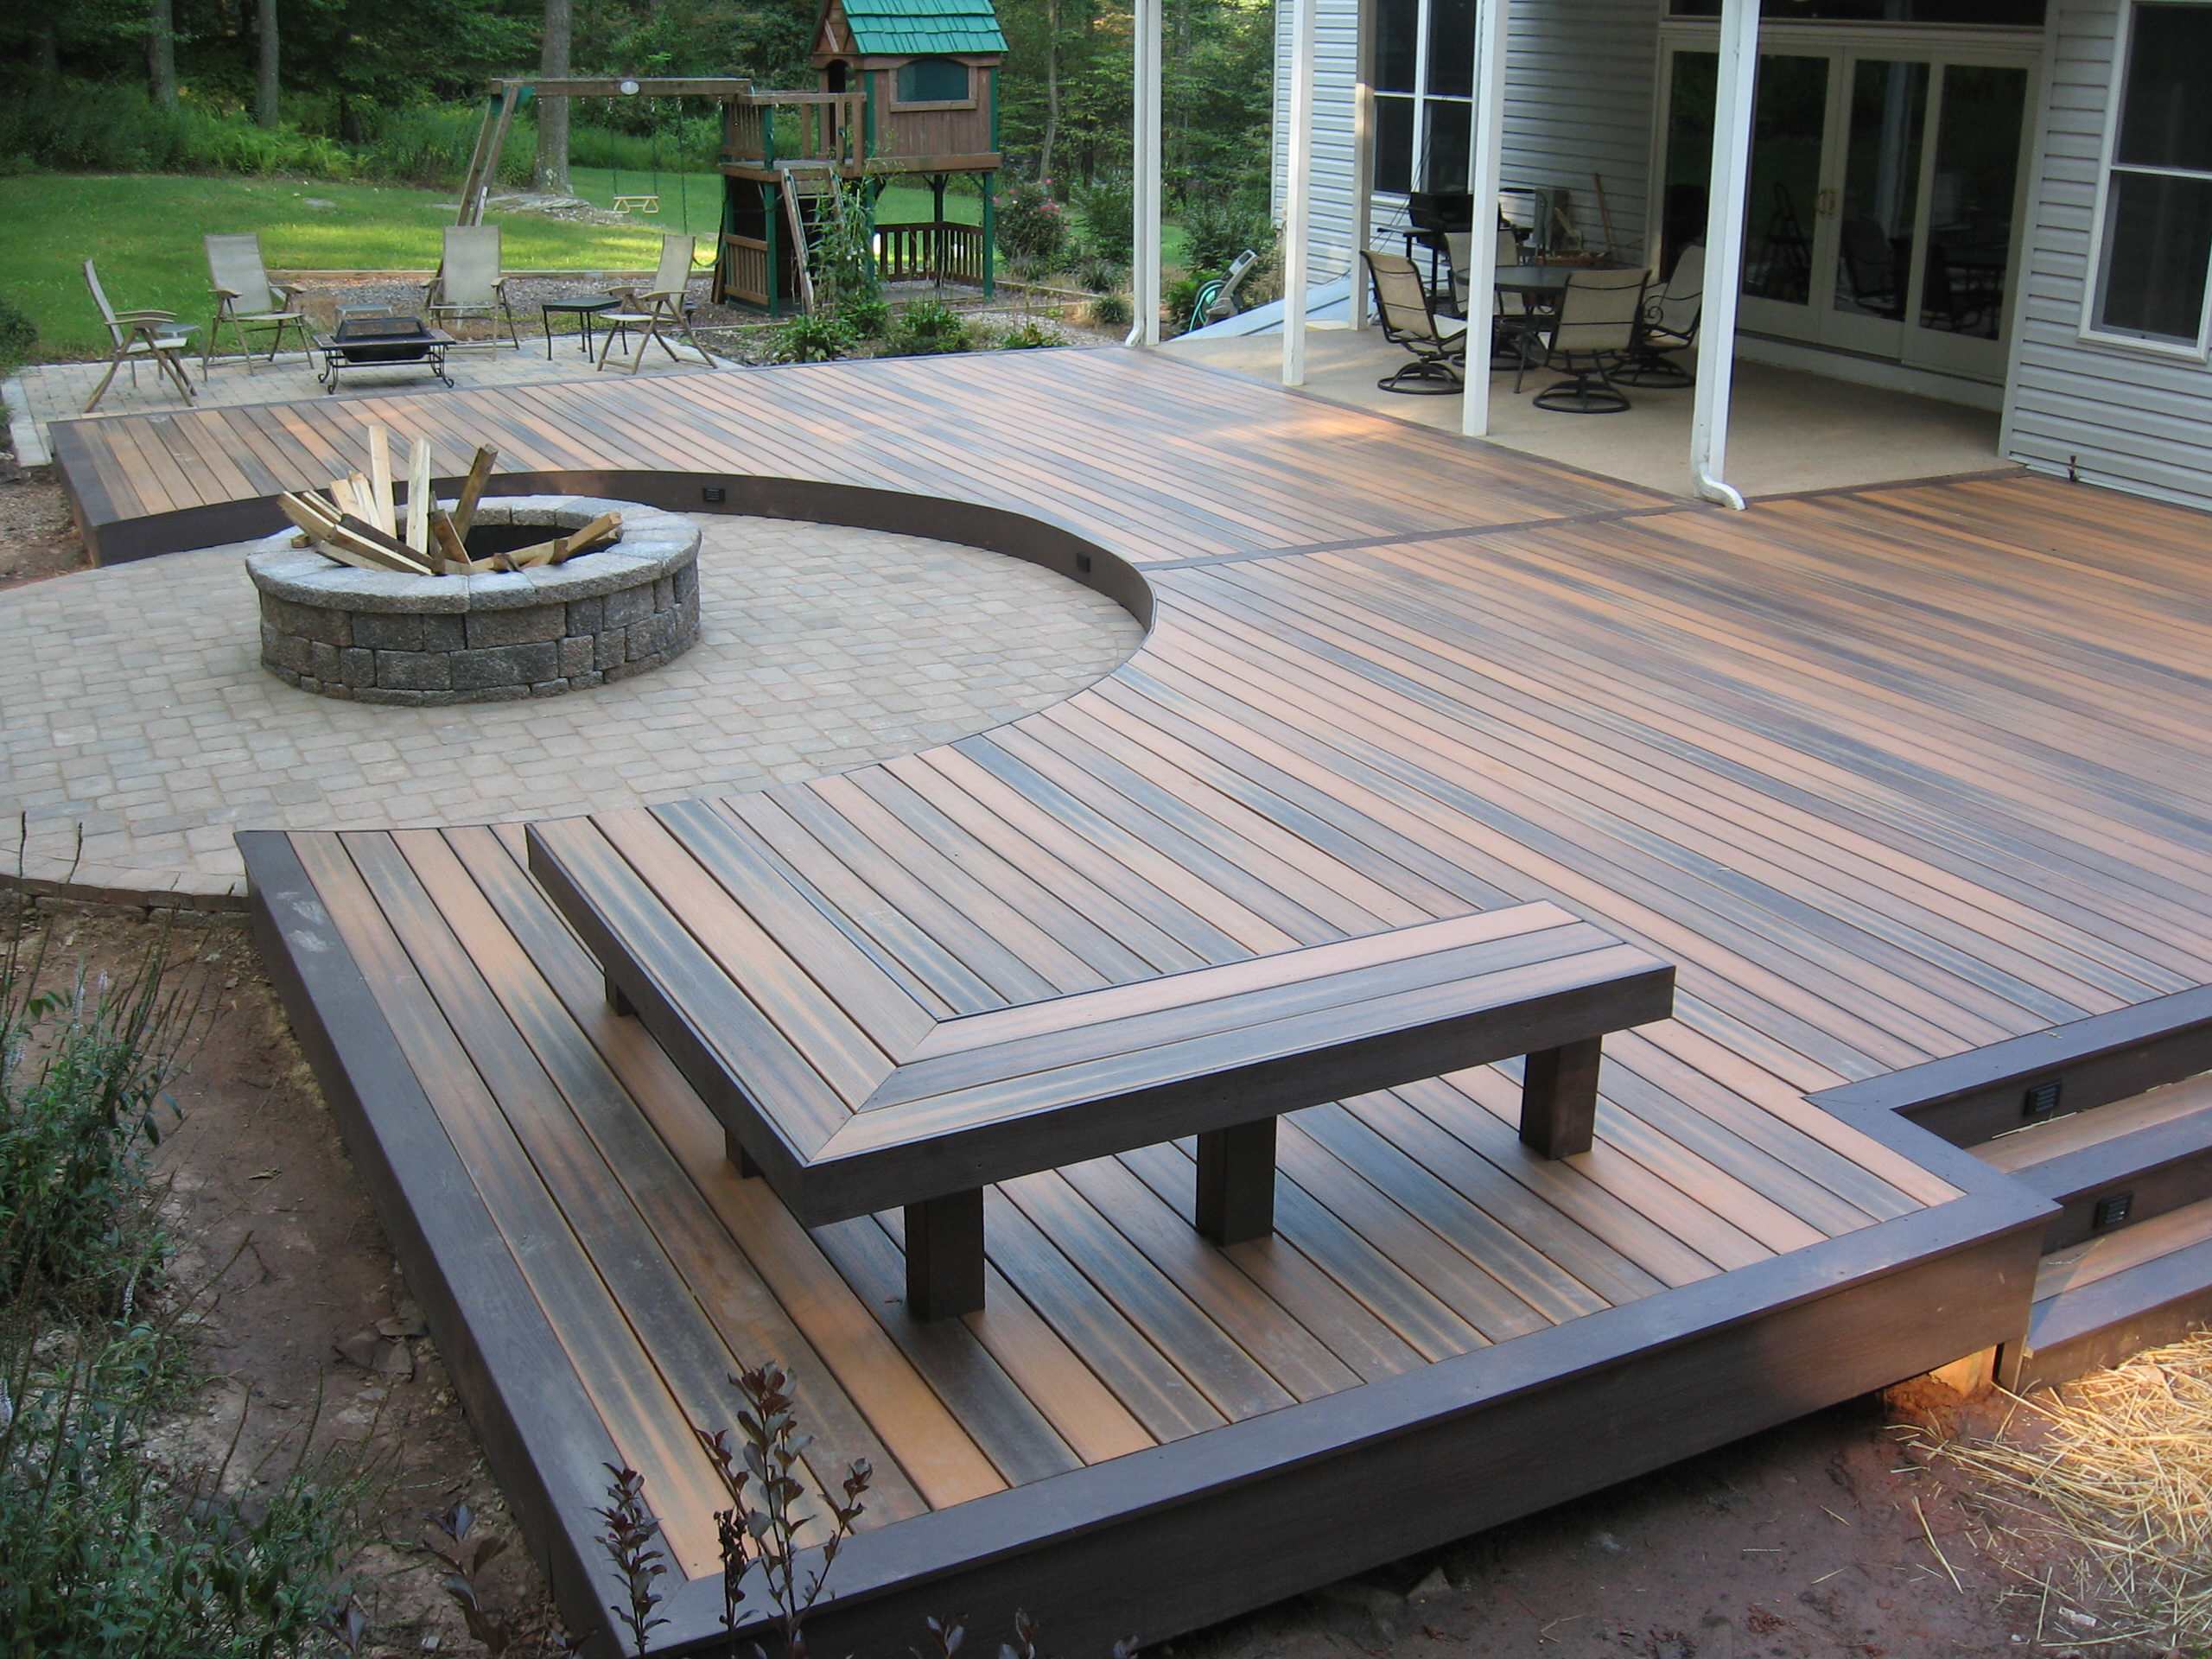 Deck With A Fire Pit Pictures Ideas, Deck Fire Pit Images